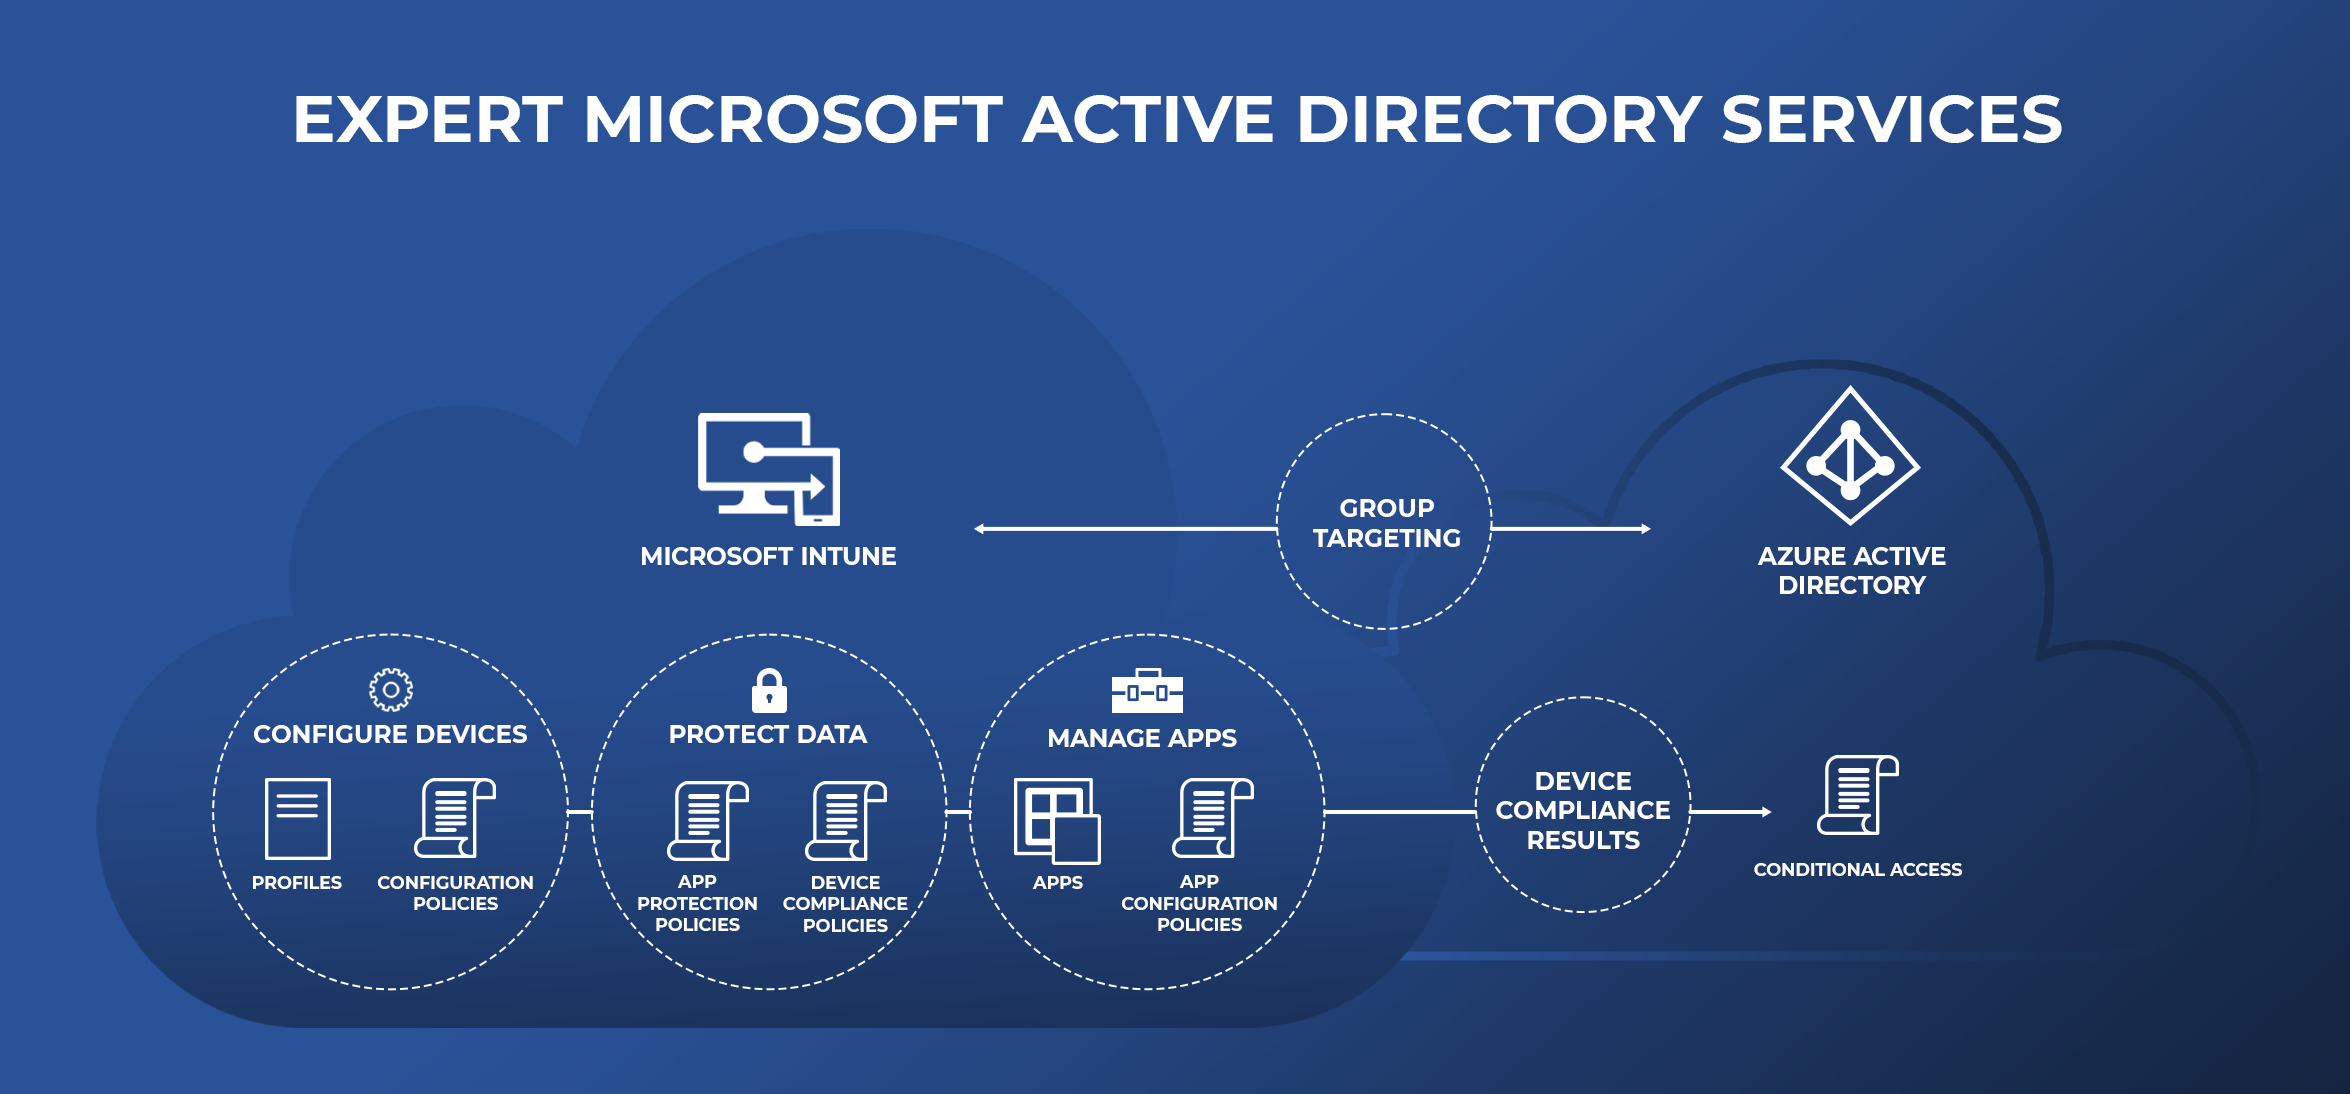 Microsoft Active Directory without Managed Services in Cardiff By The Sea CA, 92007